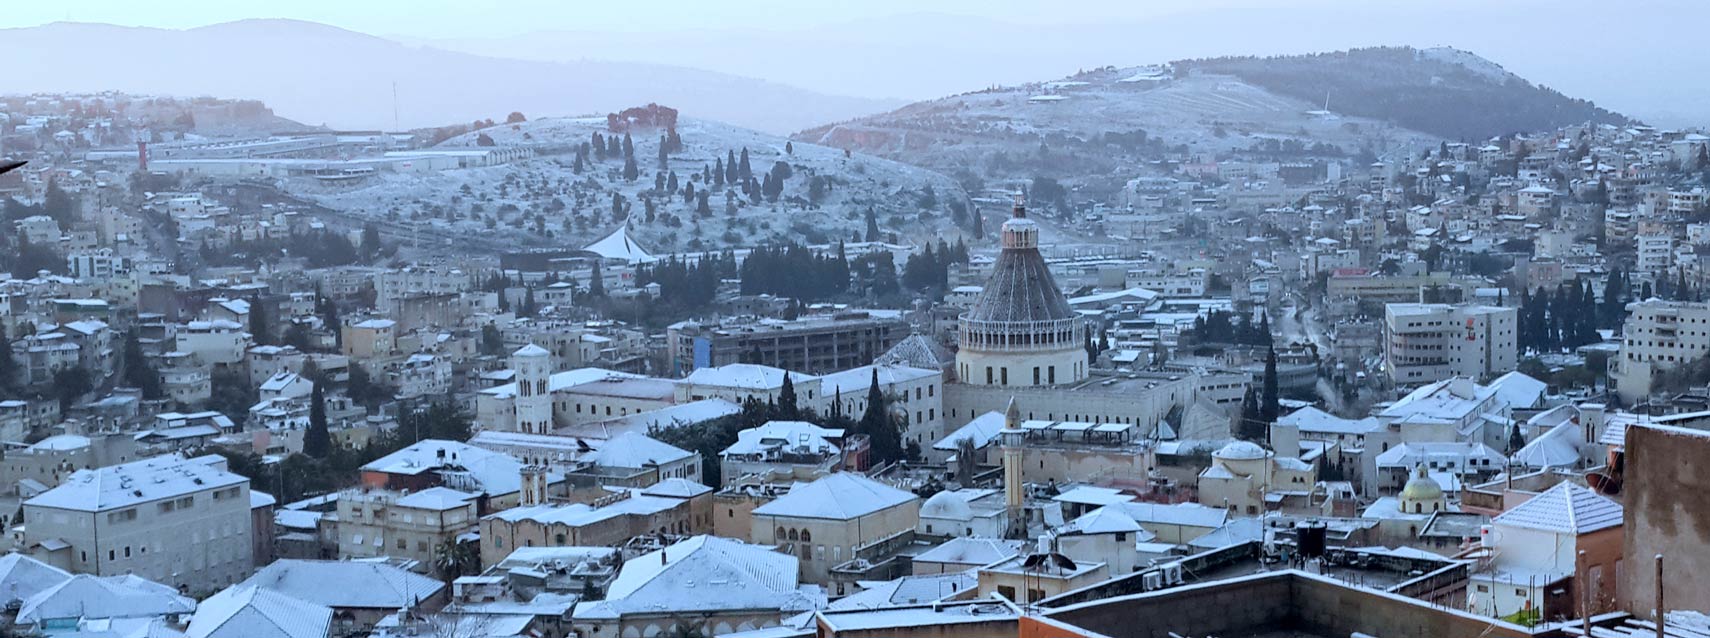 Nazareth Israel Picture and videos and news